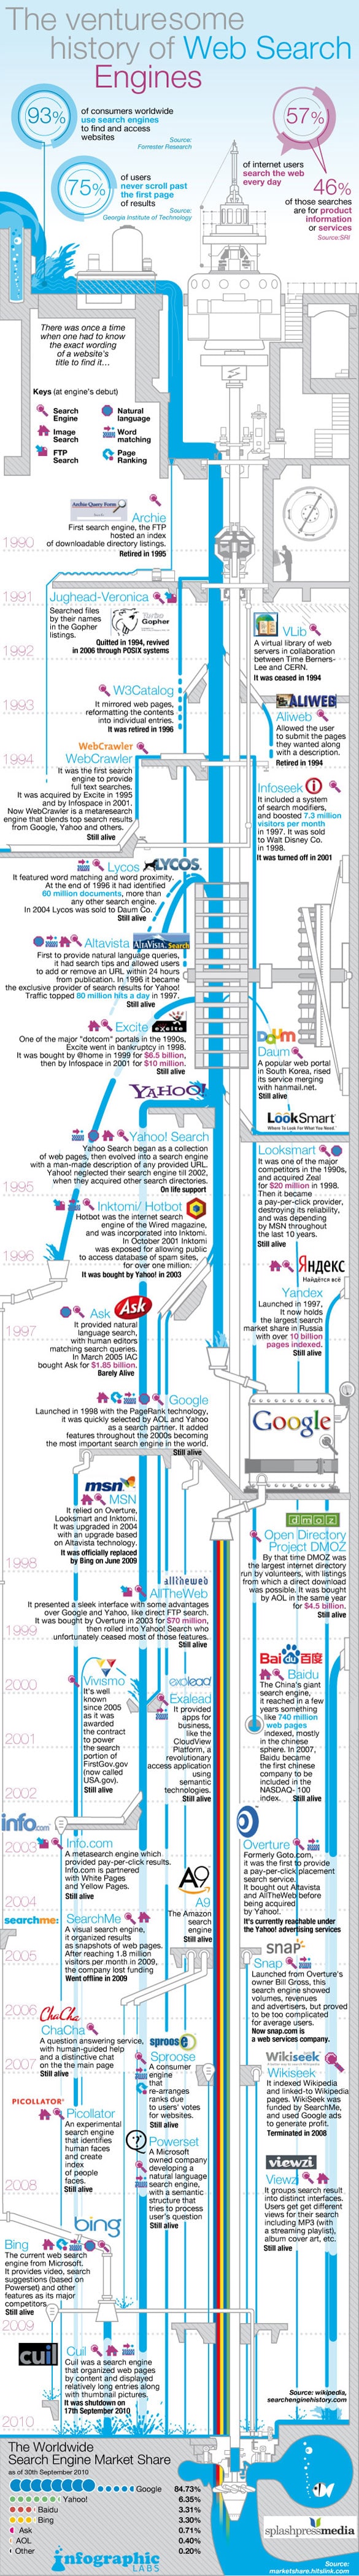 Search Engine History Timeline Infographic